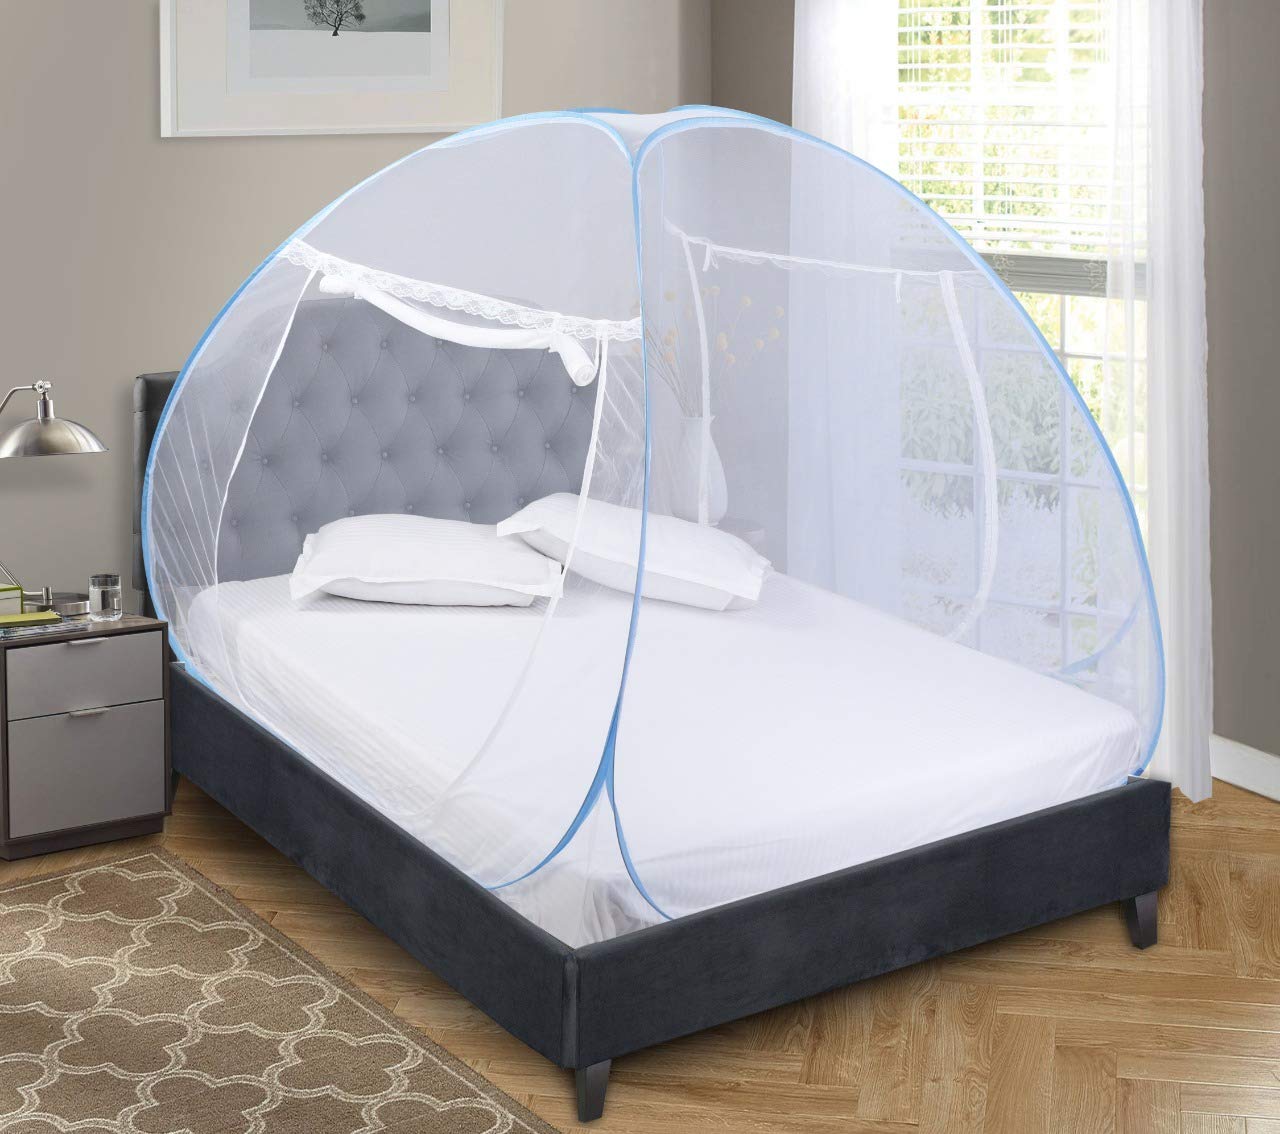 Double Bed mosquito net